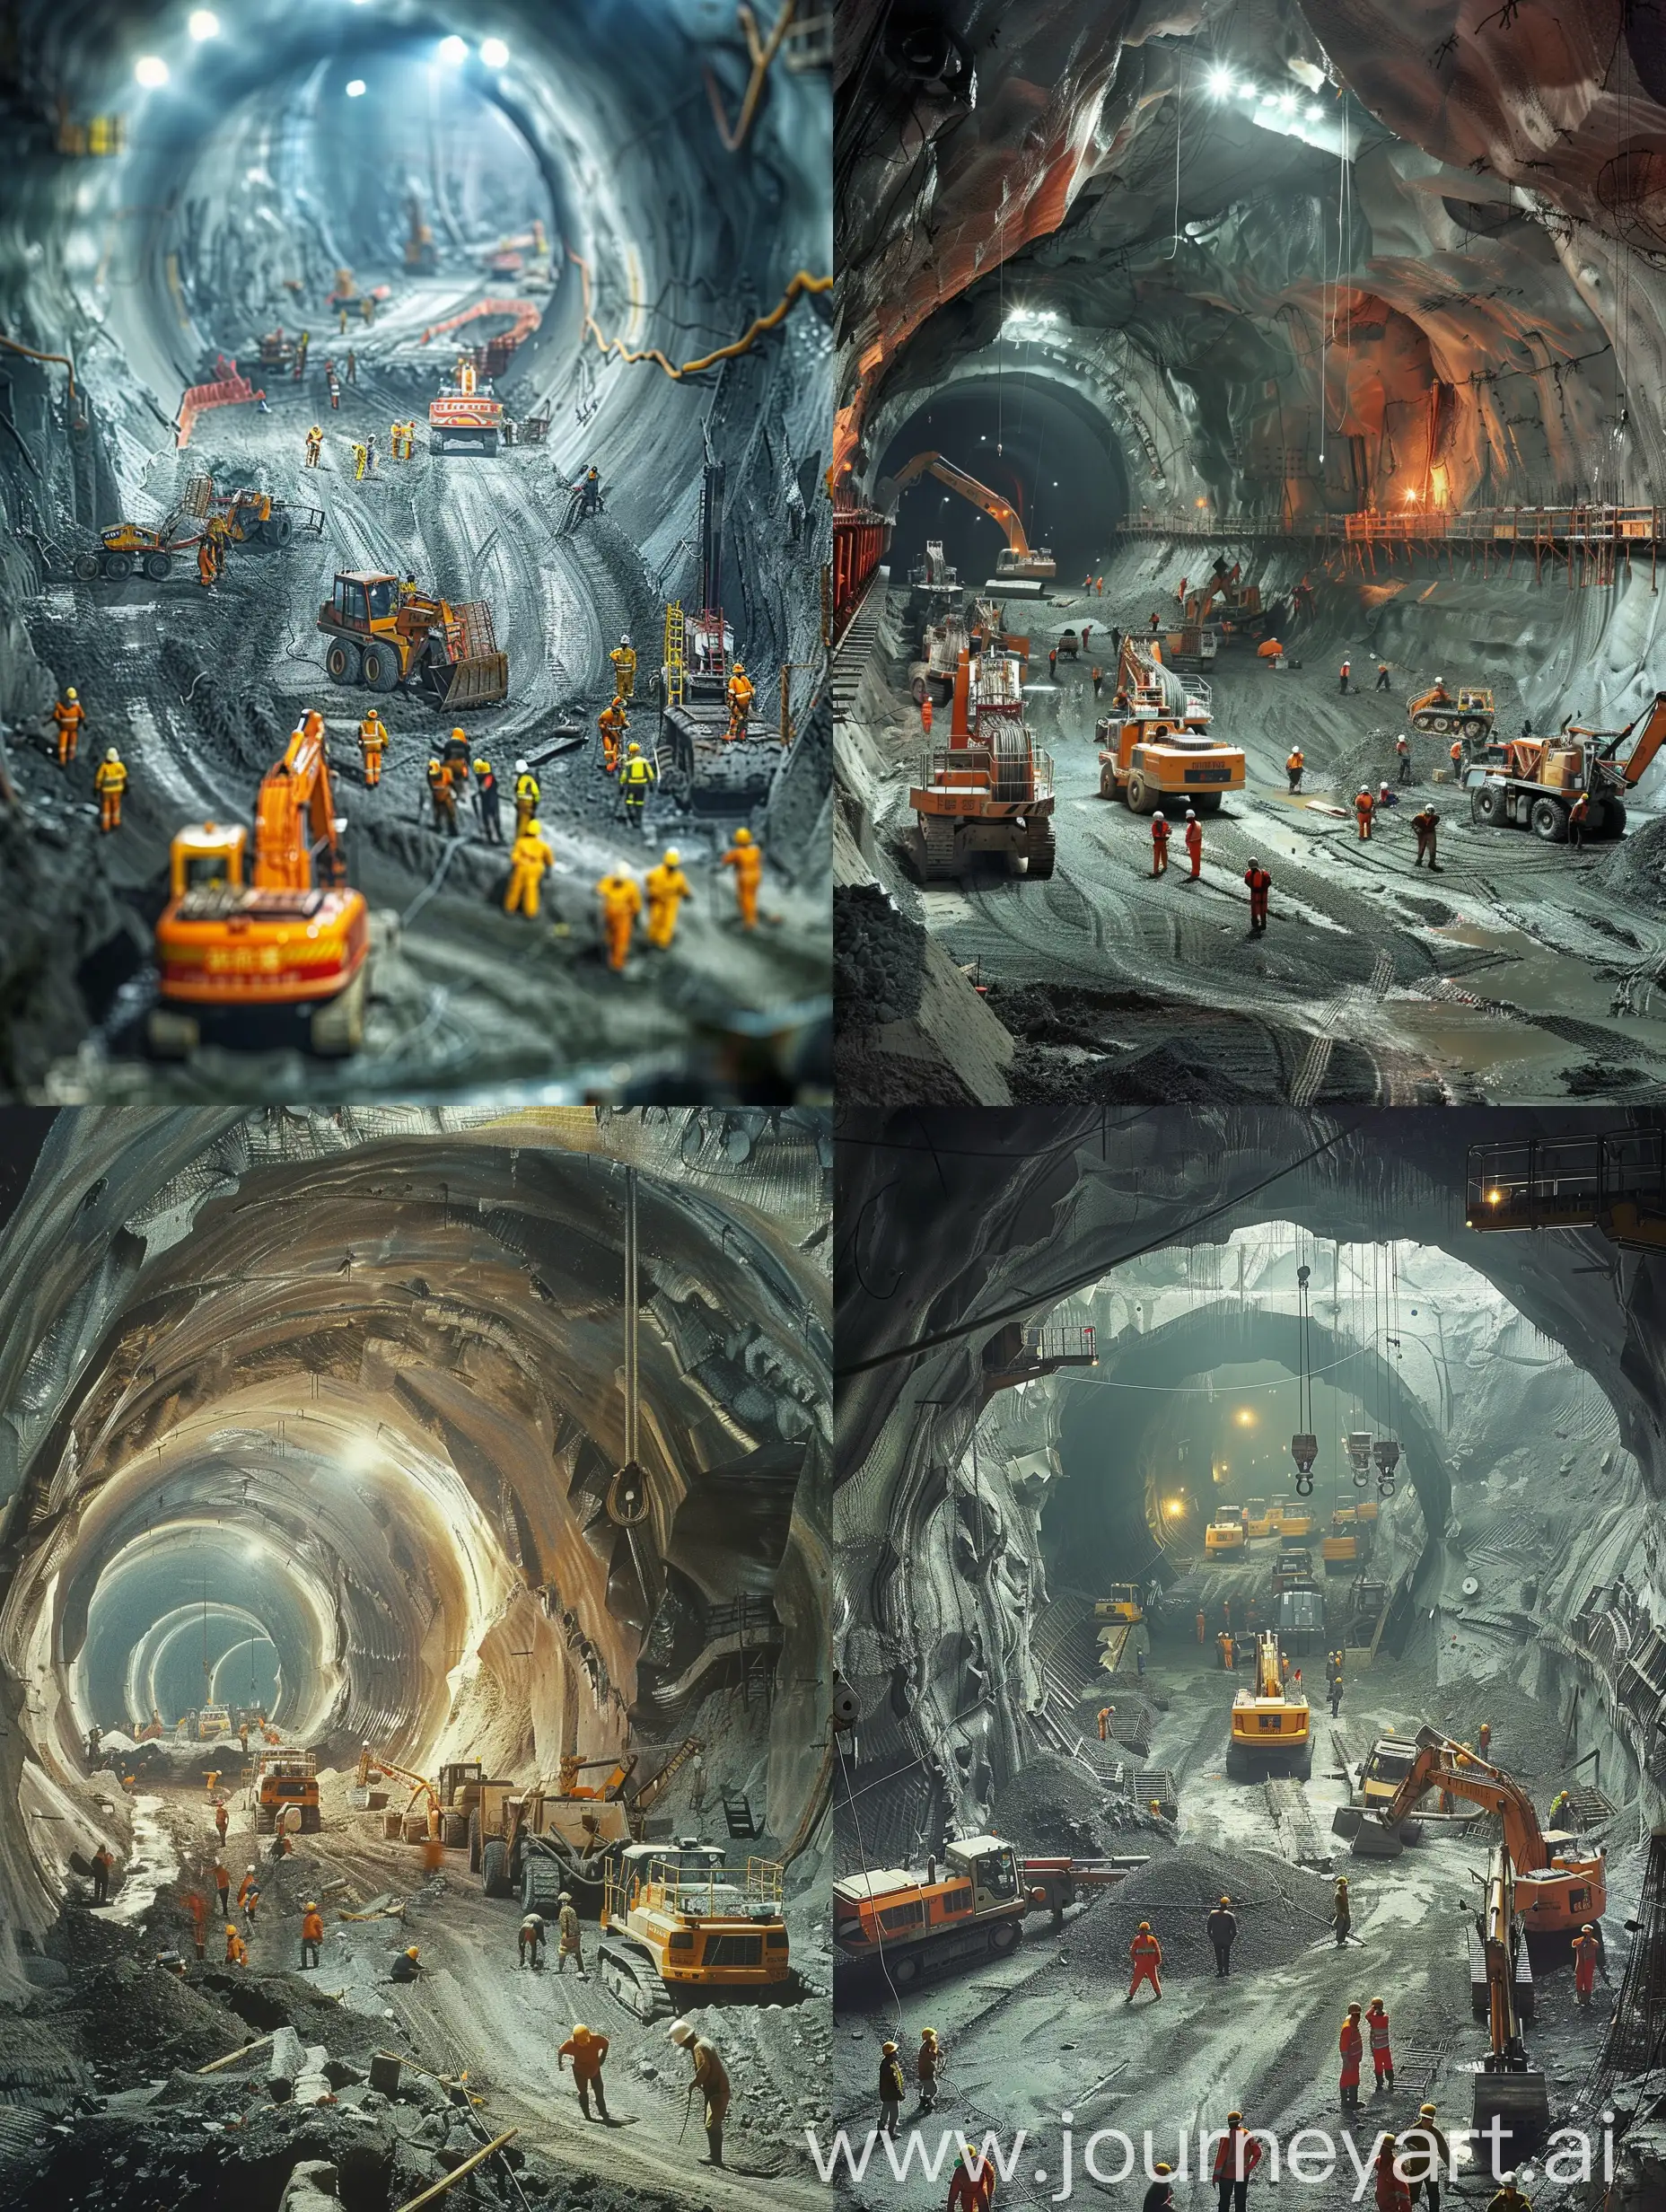 Busy-Underground-Mines-Construction-with-Workers-and-Machinery